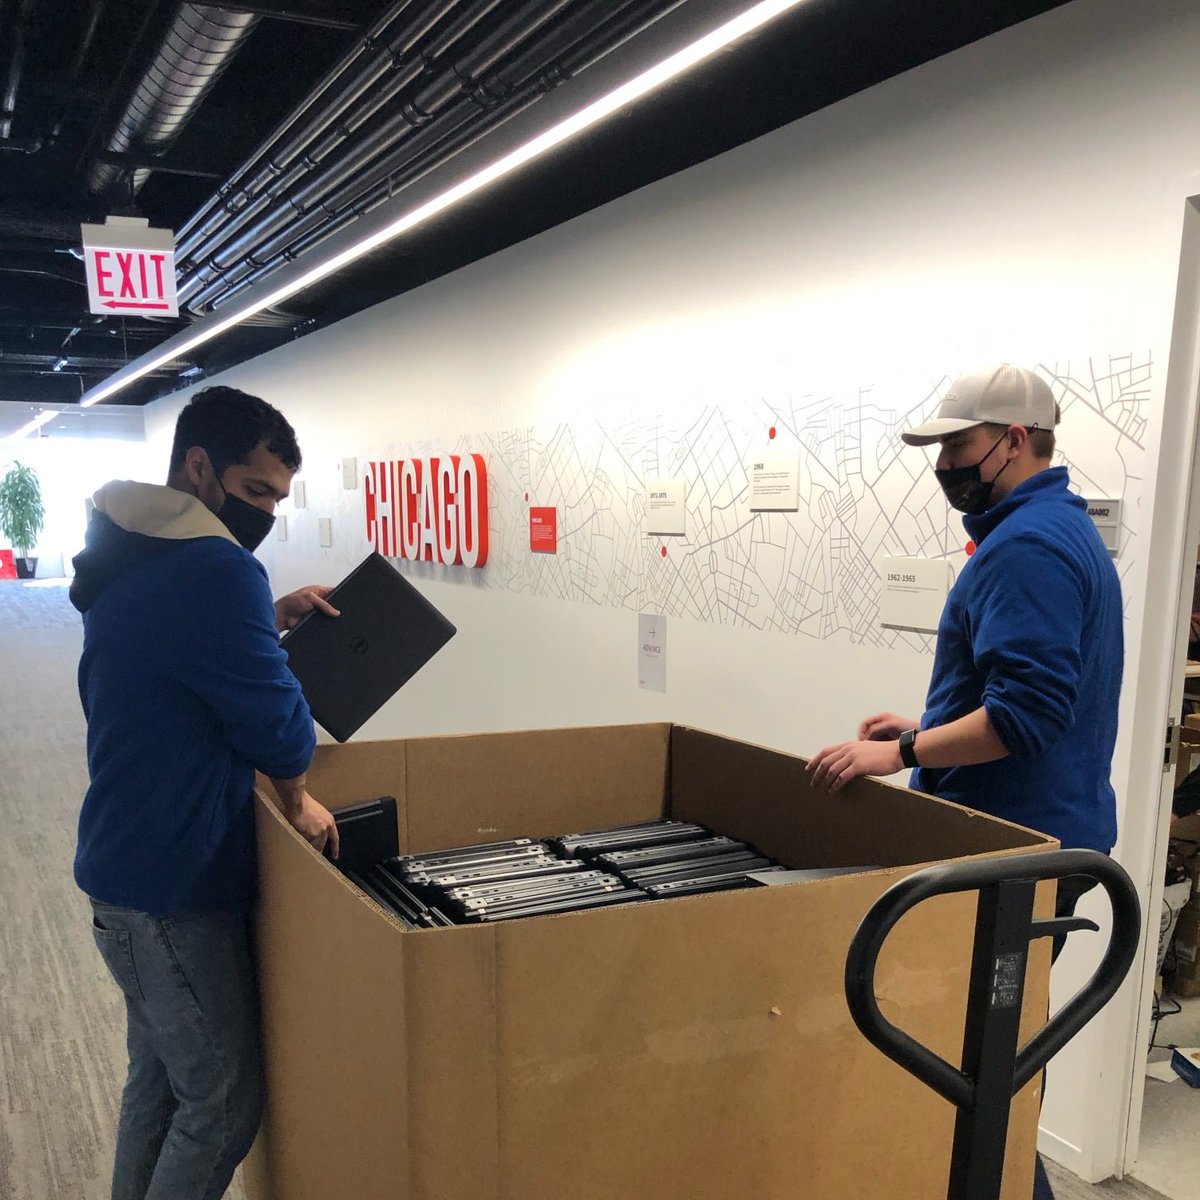 Thank you @JLL_USA! Your donation will provide laptops to families helping them participate in the digital community and keeps 3,500lbs of ewaste out of landfills. THIS is what happens when organizations come together to lift up our community! #digitalequity #ewasterecycling